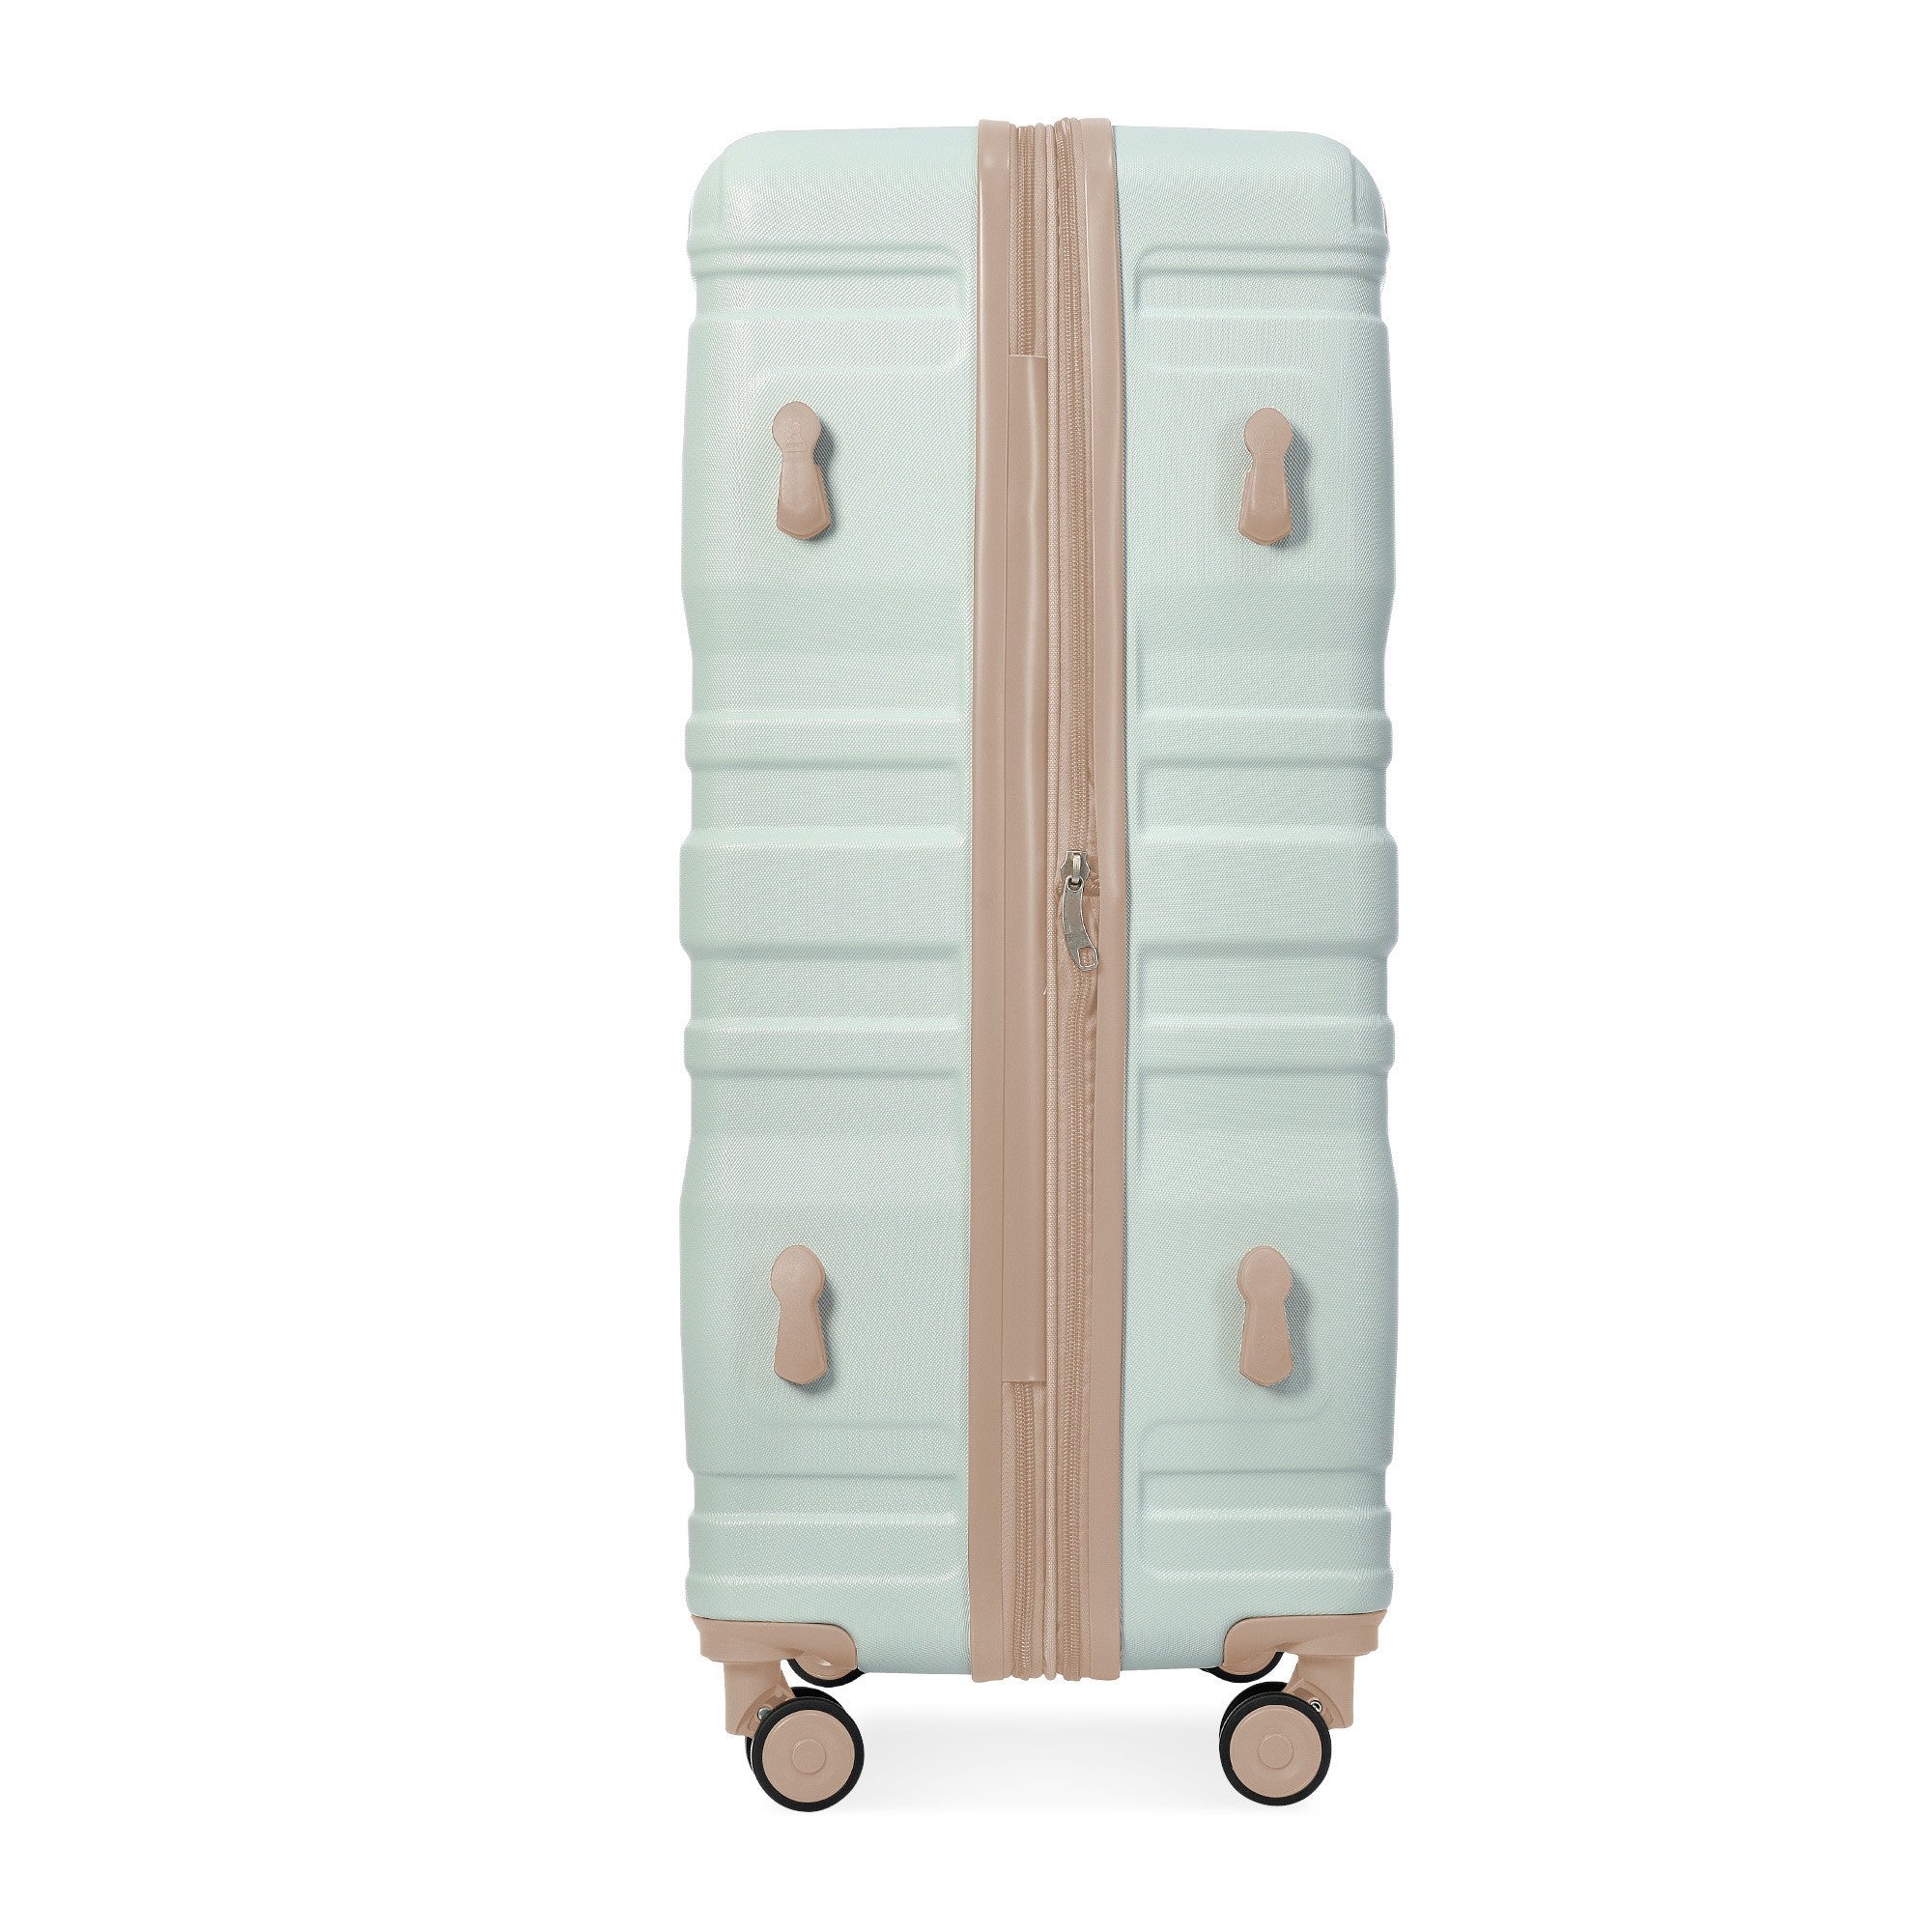 Luggage Sets Model Expandable ABS Hardshell 3pcs green-abs